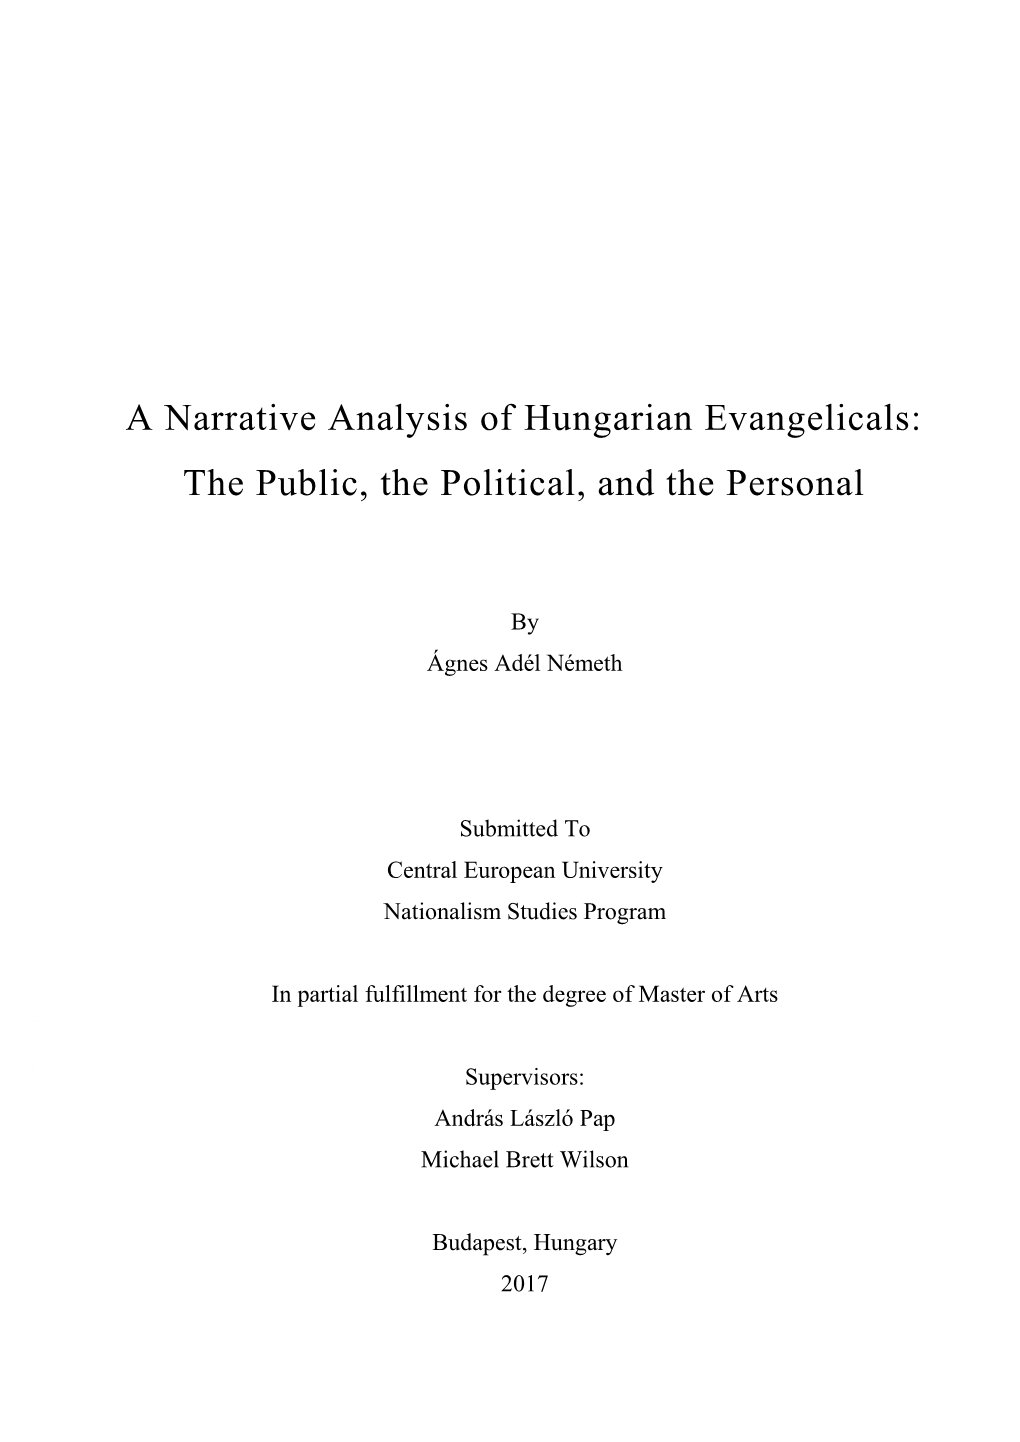 A Narrative Analysis of Hungarian Evangelicals: the Public, the Political, and the Personal